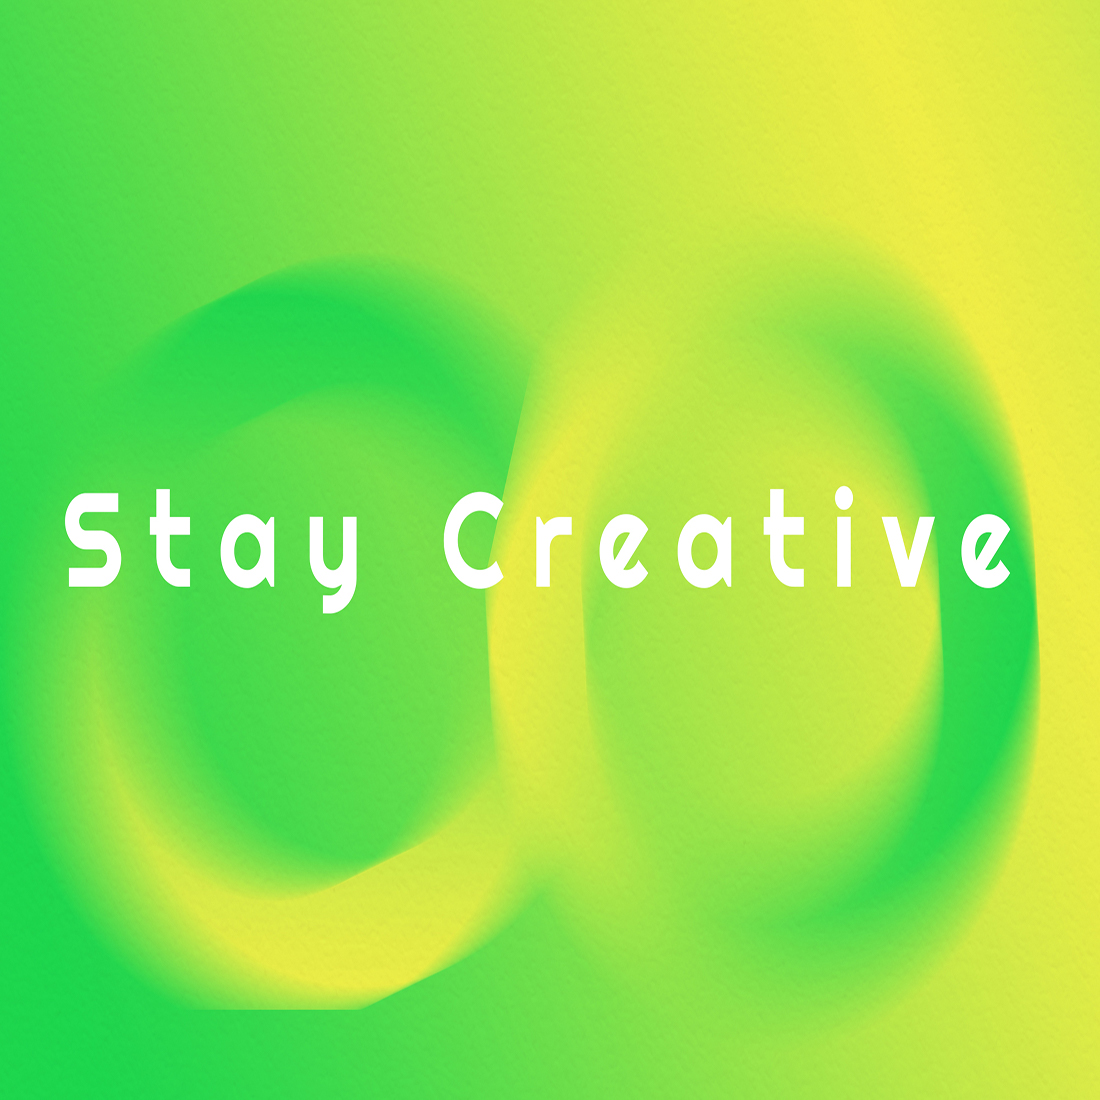 stay creative Abstract Energy Backgrounds.